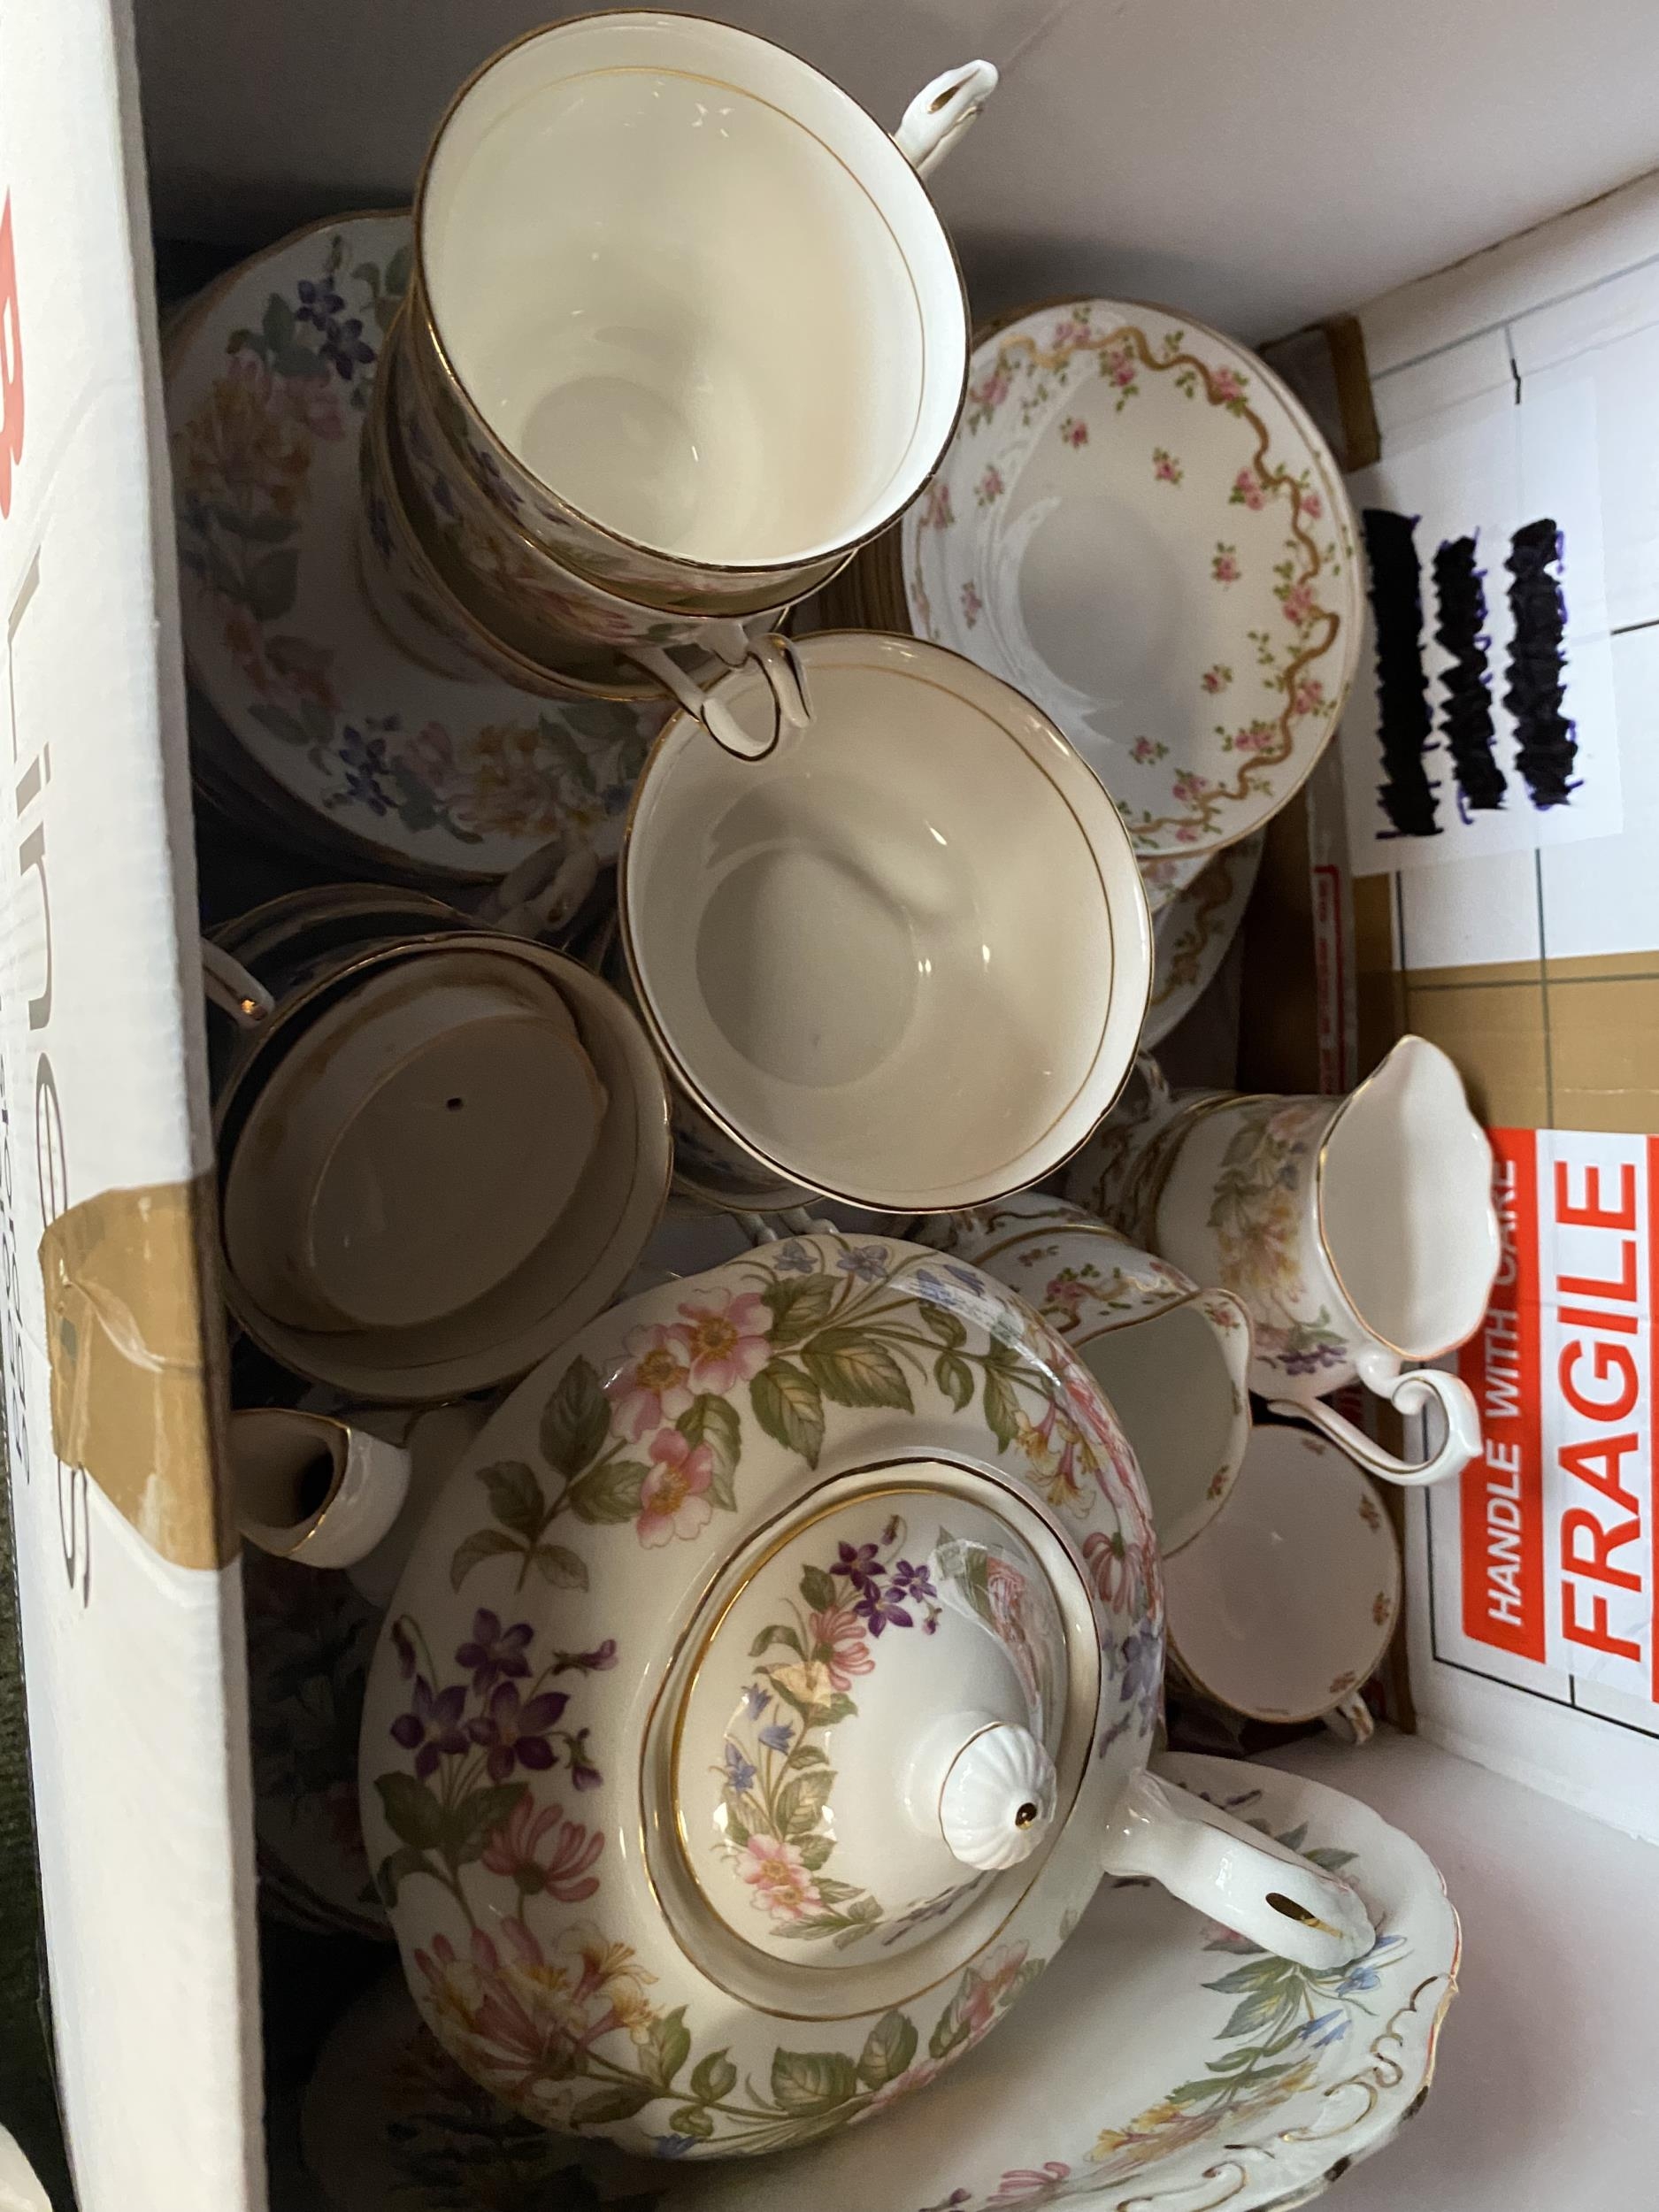 Two part tea sets, Paragon Country Lane, and Crown Staffordshire, and a quantity of other china - Image 10 of 12